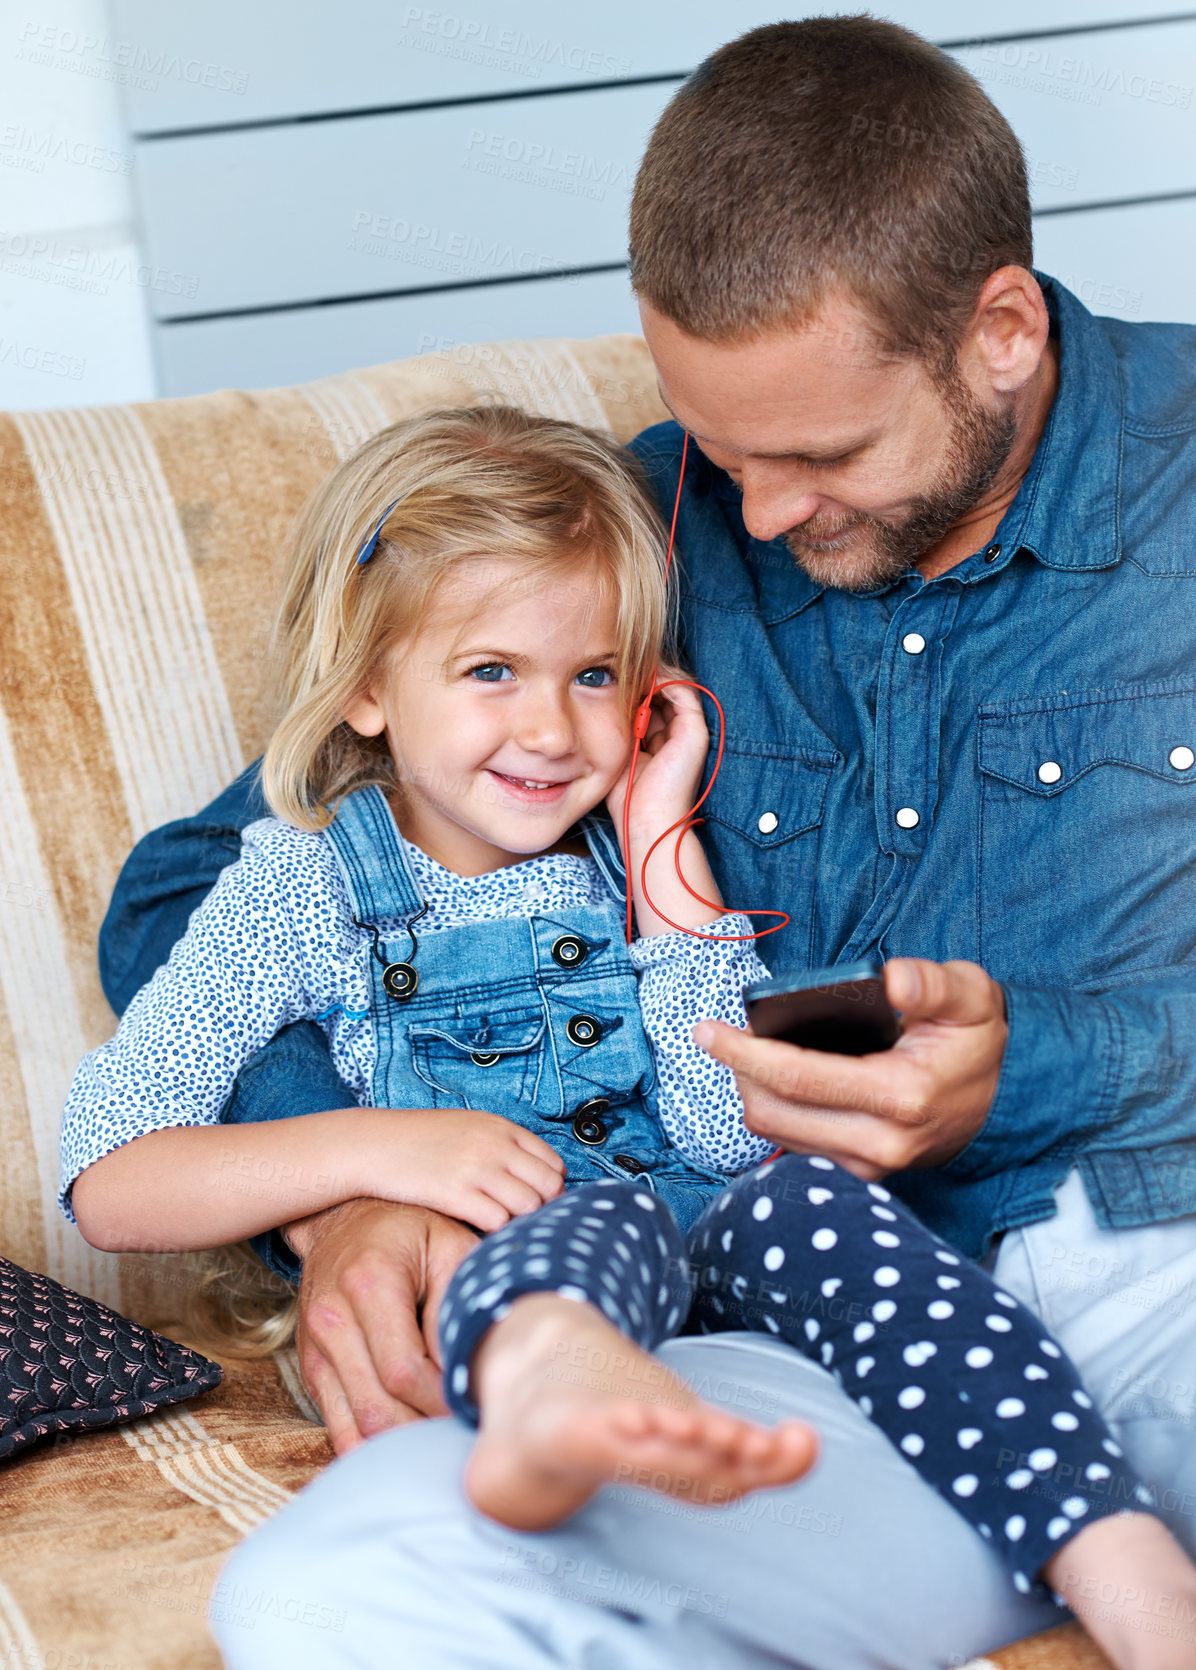 Buy stock photo Shot of an adorable little girl sitting on the sofa sharing headphones with her father